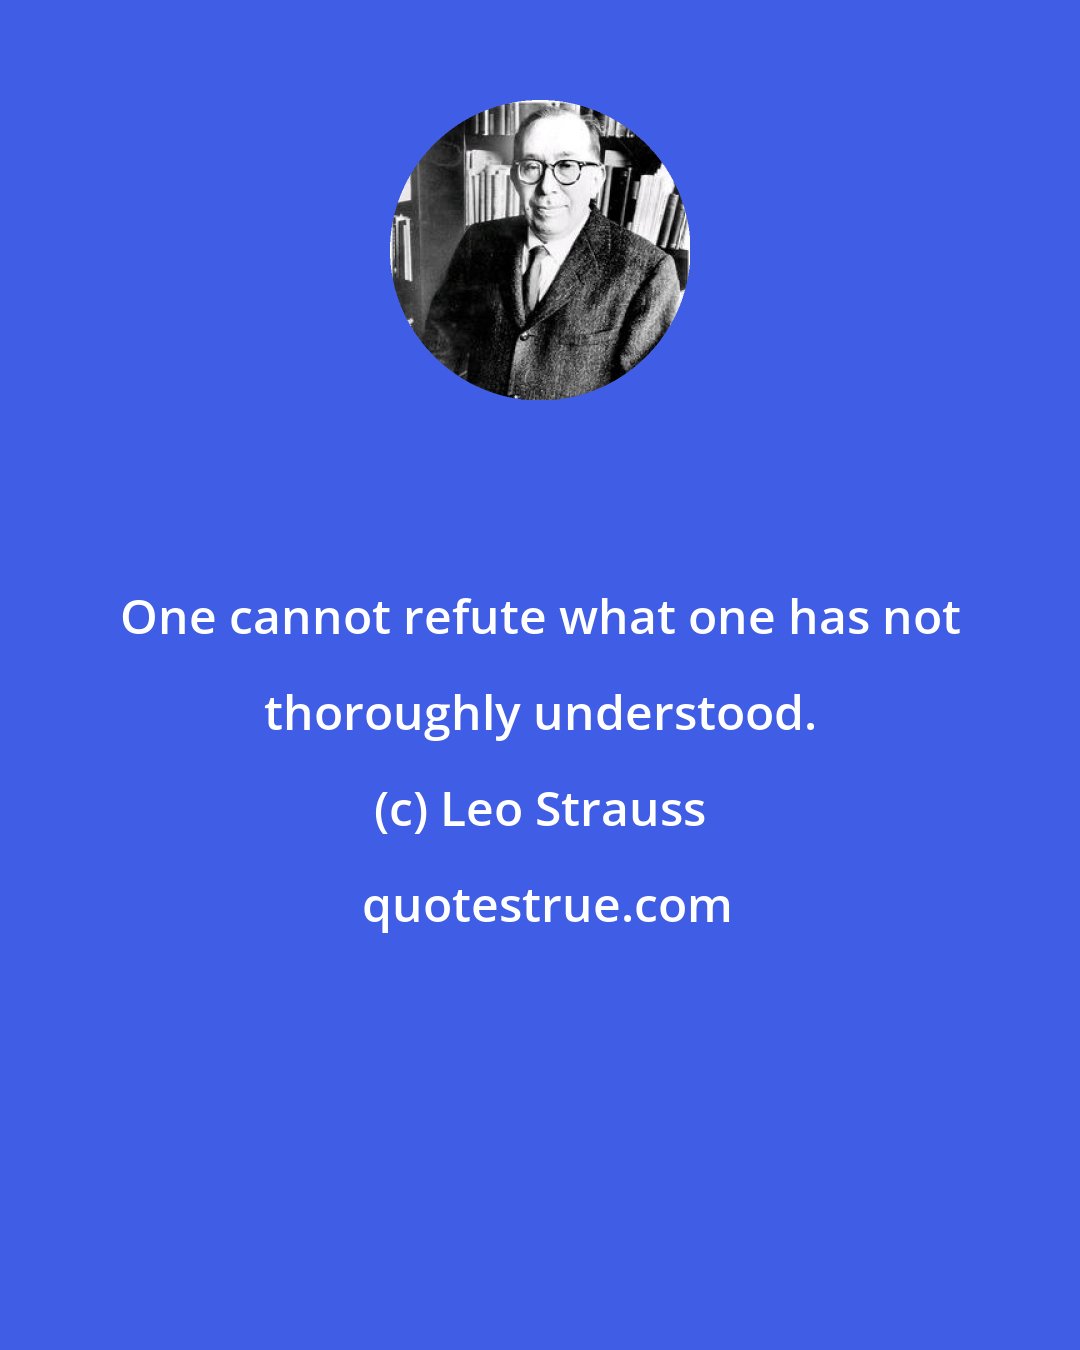 Leo Strauss: One cannot refute what one has not thoroughly understood.